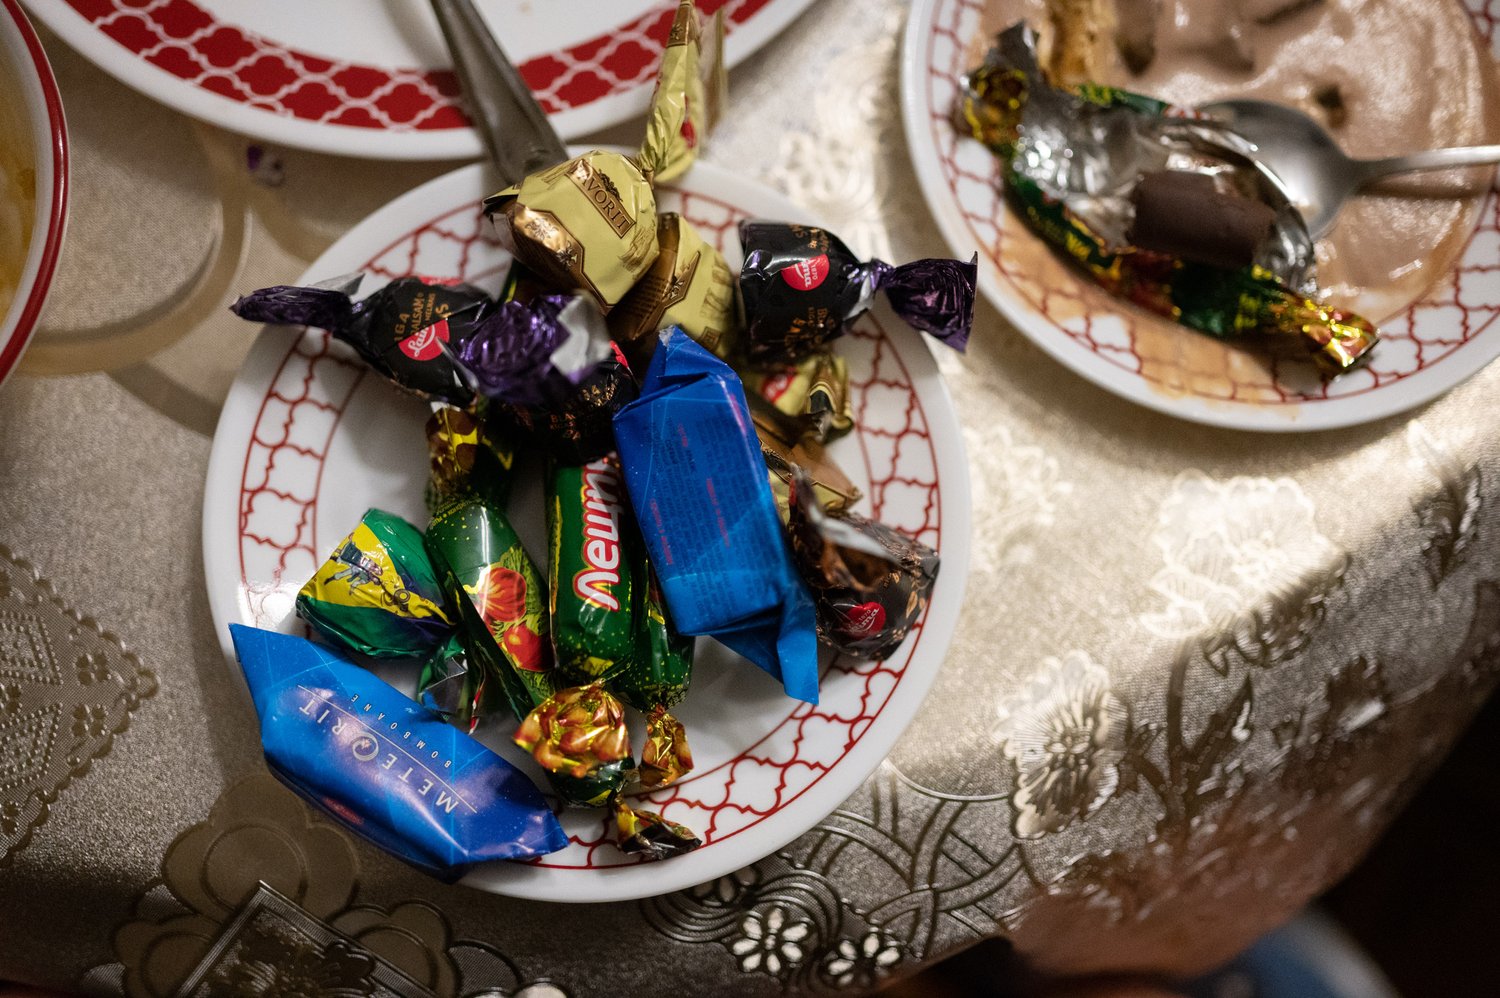   A plate full of Ukrainian candy sits on the dinner table for dessert.  